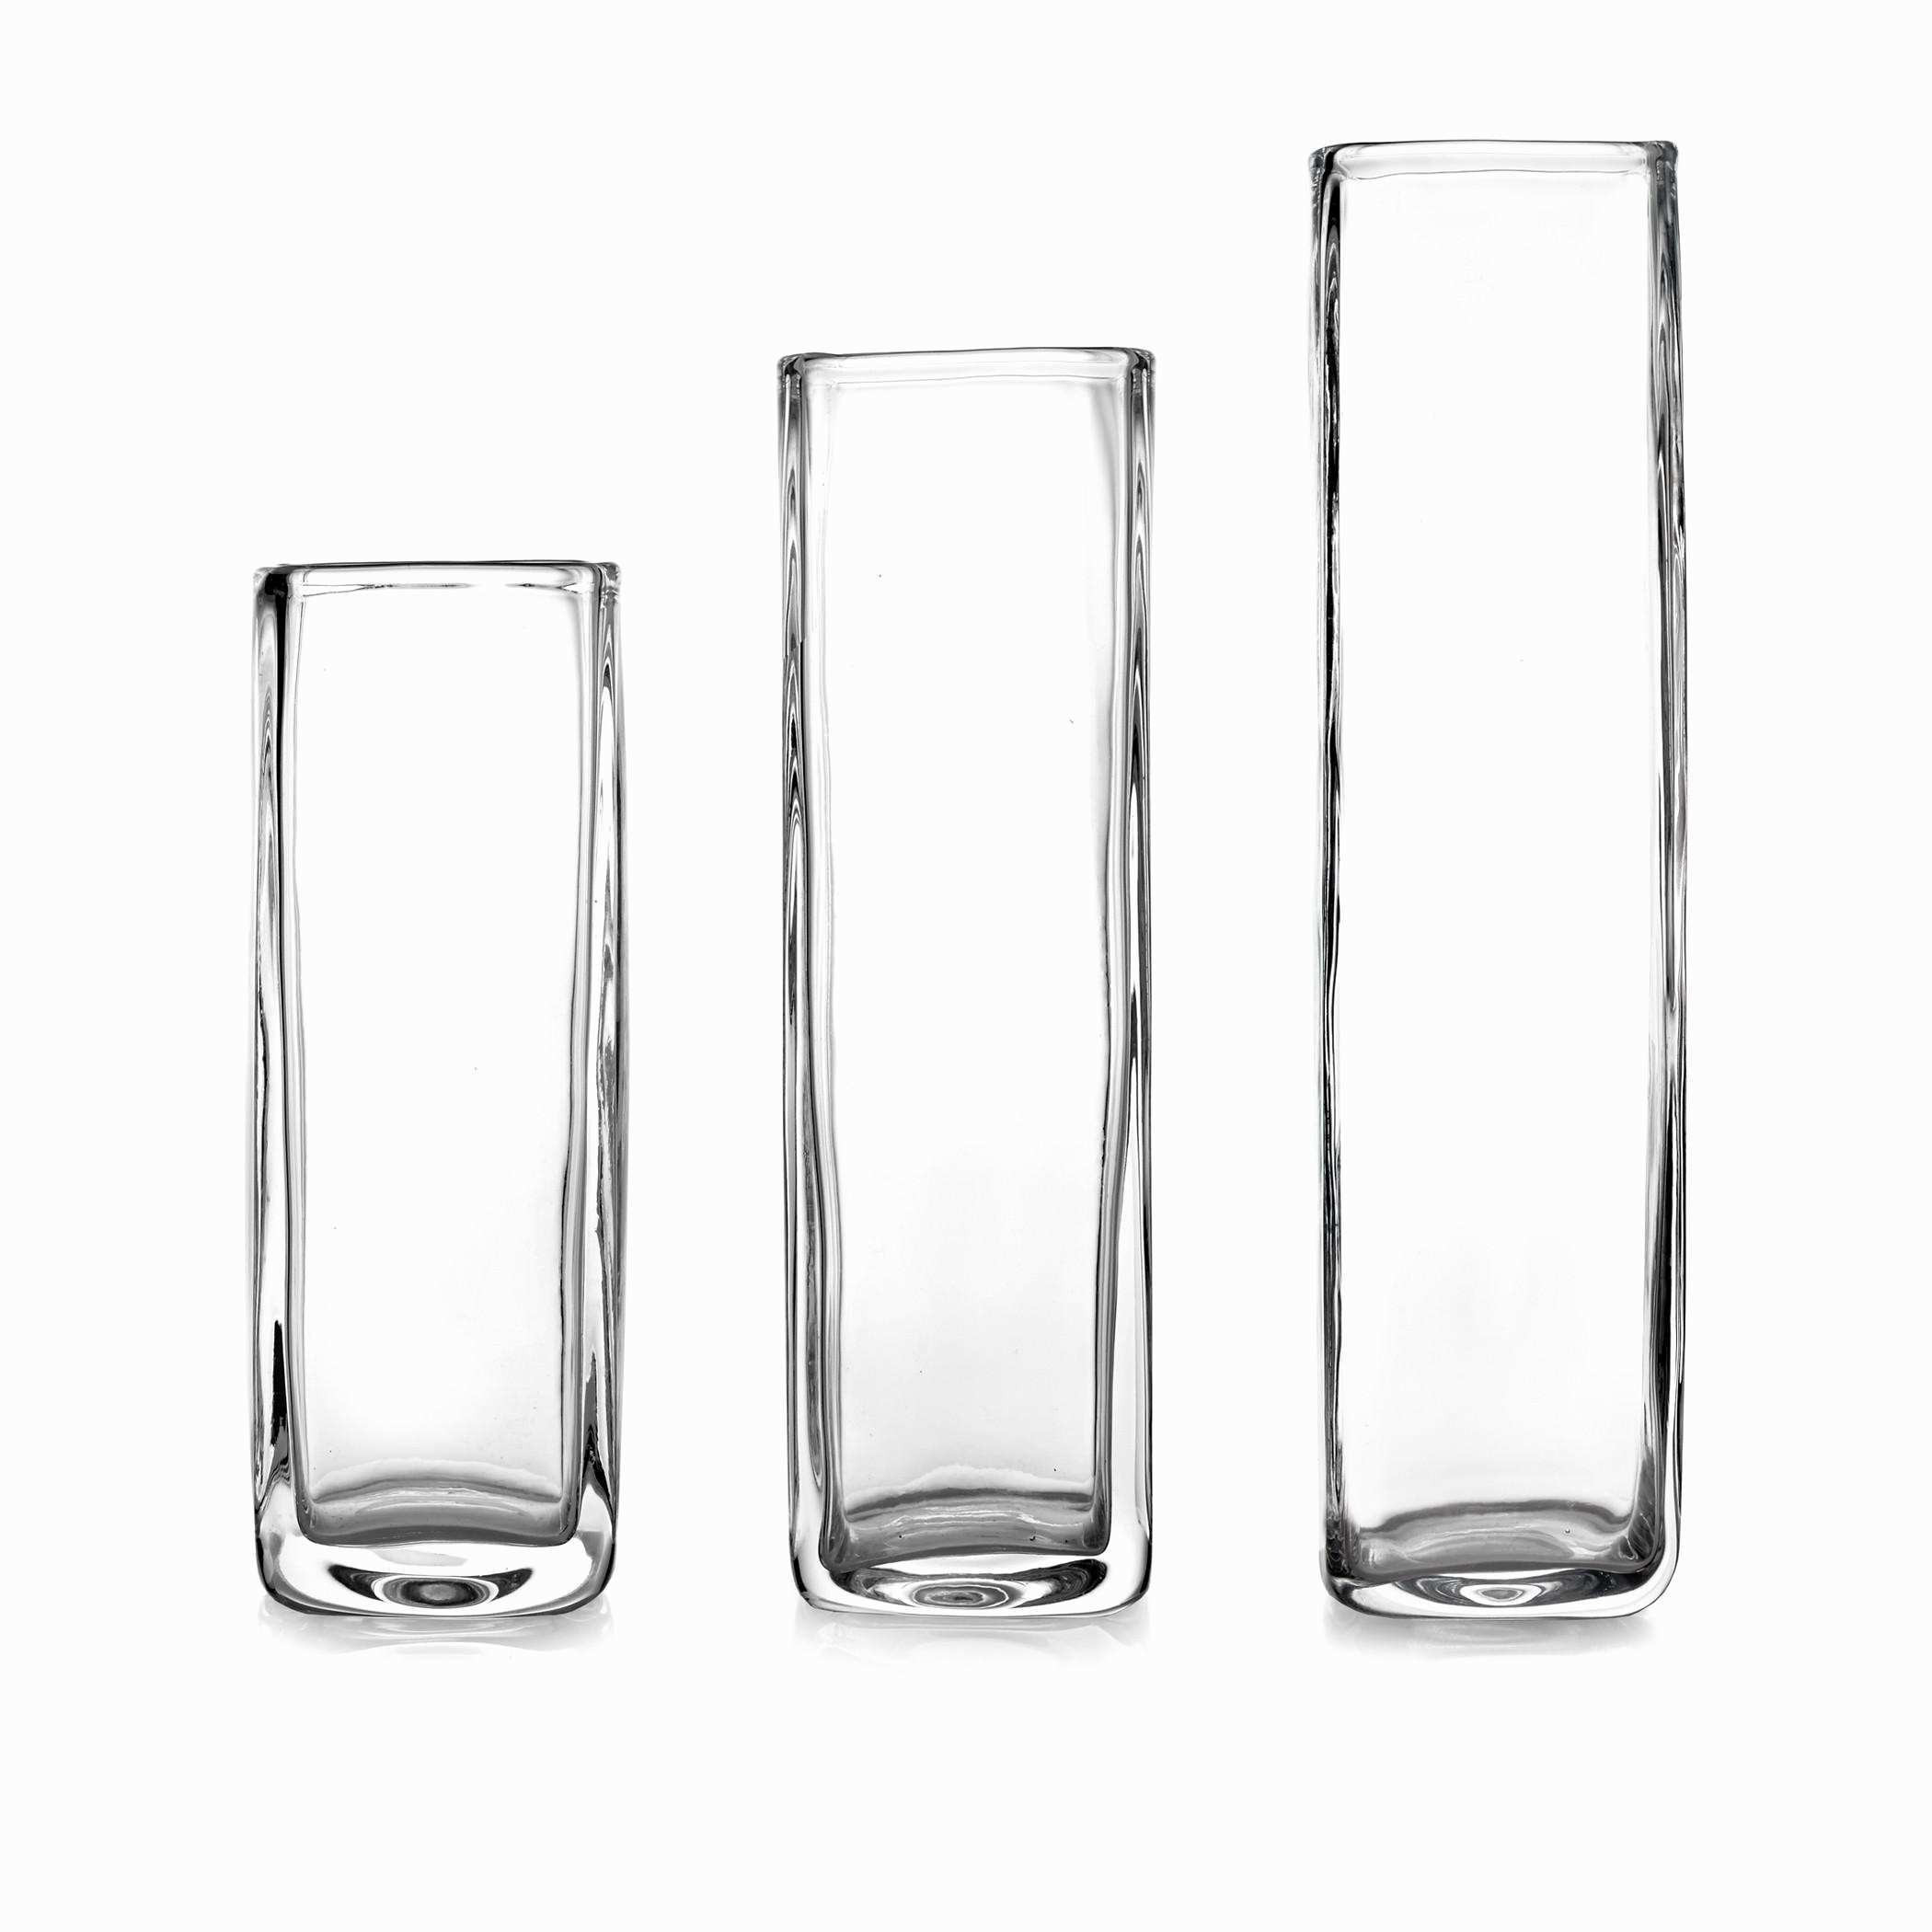 28 Great 6 Inch Square Glass Vase 2024 free download 6 inch square glass vase of black glass vases images glass wedding centerpieces inspirational inside black glass vases images glass wedding centerpieces inspirational living room tall glass